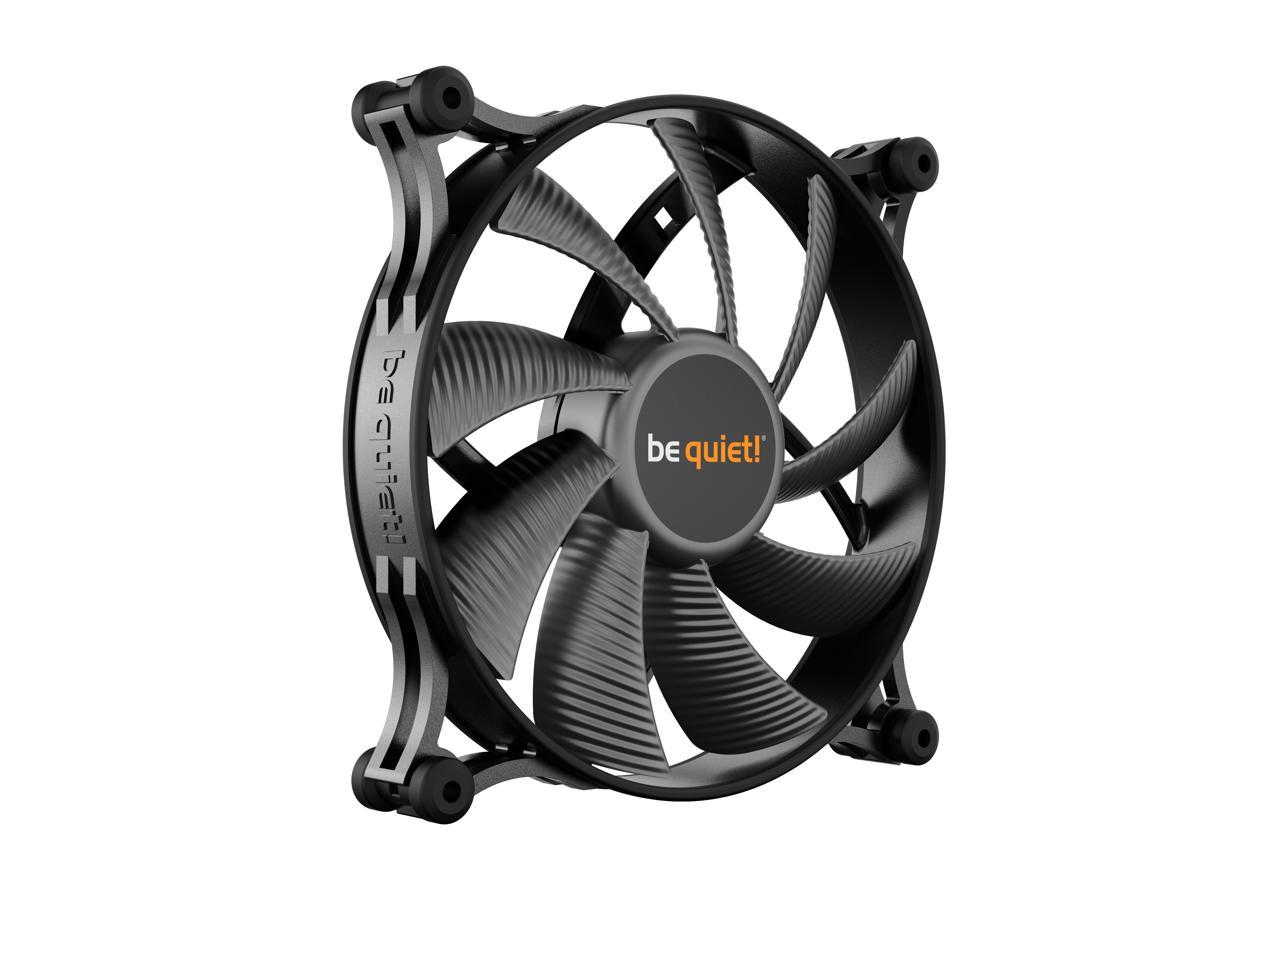 be quiet! Shadow Wings 2 140mm, airflow-optimized fan blades, whisper-quiet operation and reliable cooling.